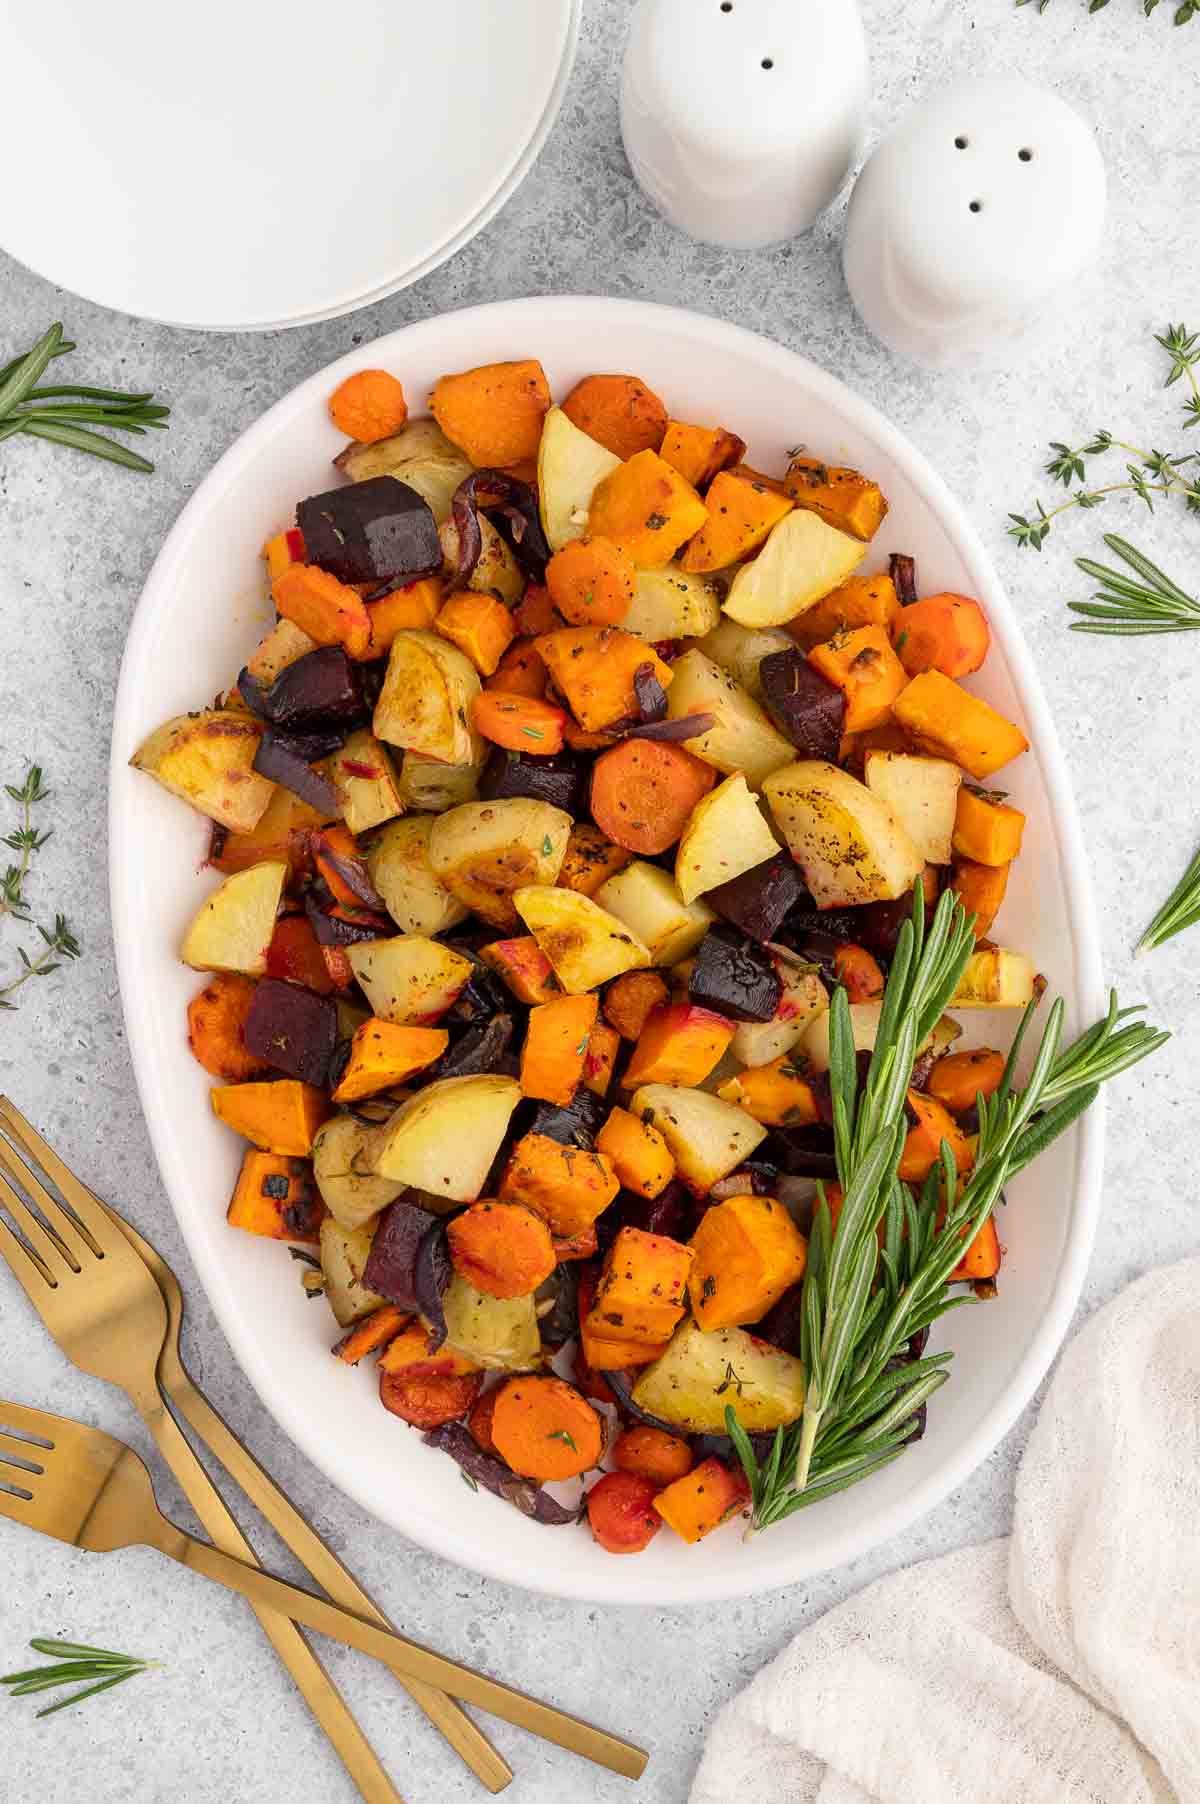 Roasted root vegetables in a white serving vessel.